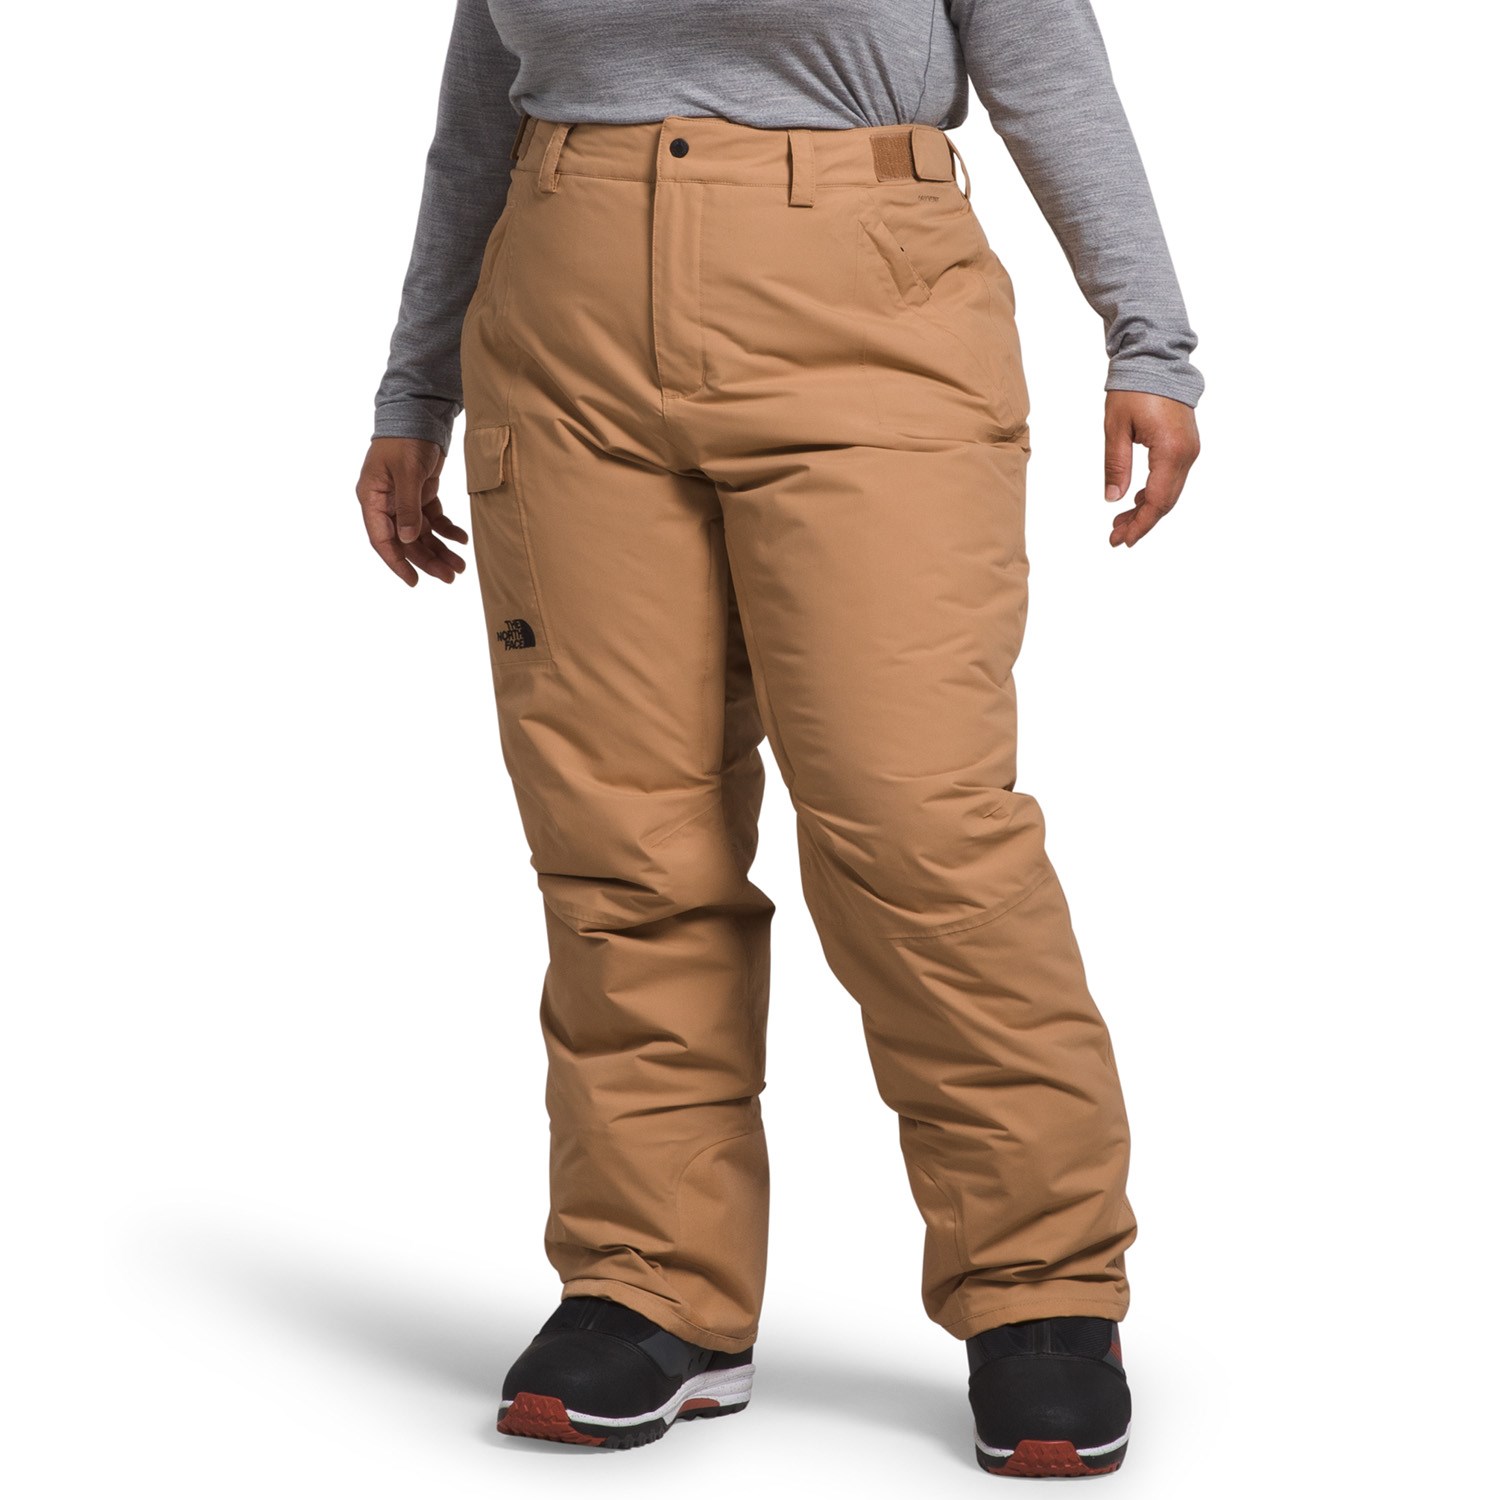 Брюки The North Face Freedom Insulated Plus Short, цвет Almond Butter брюки freedom bib женские the north face черный